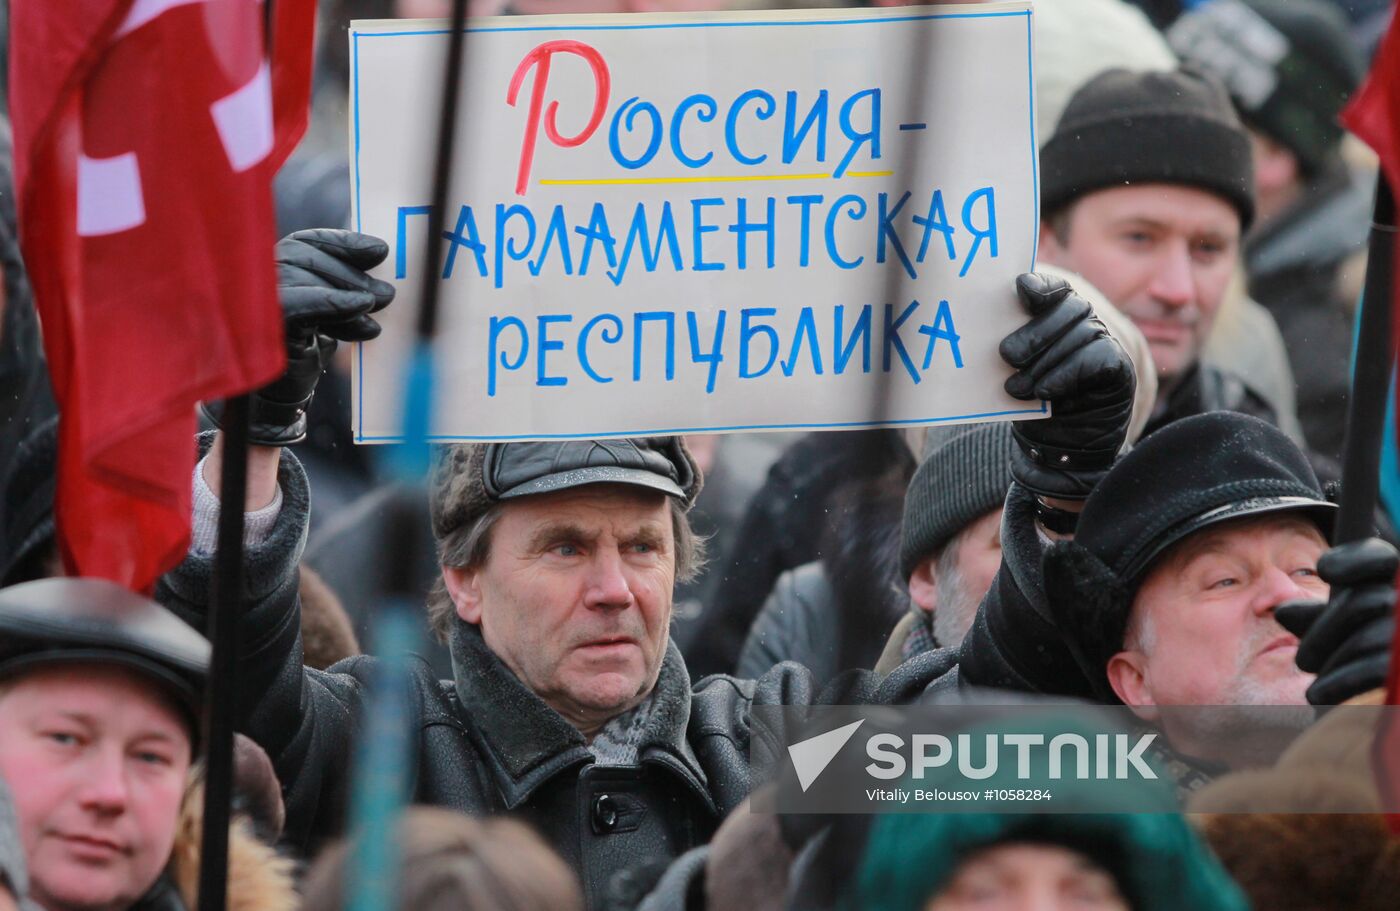 For Fair Election rally on Pushkinskaya Square in Moscow